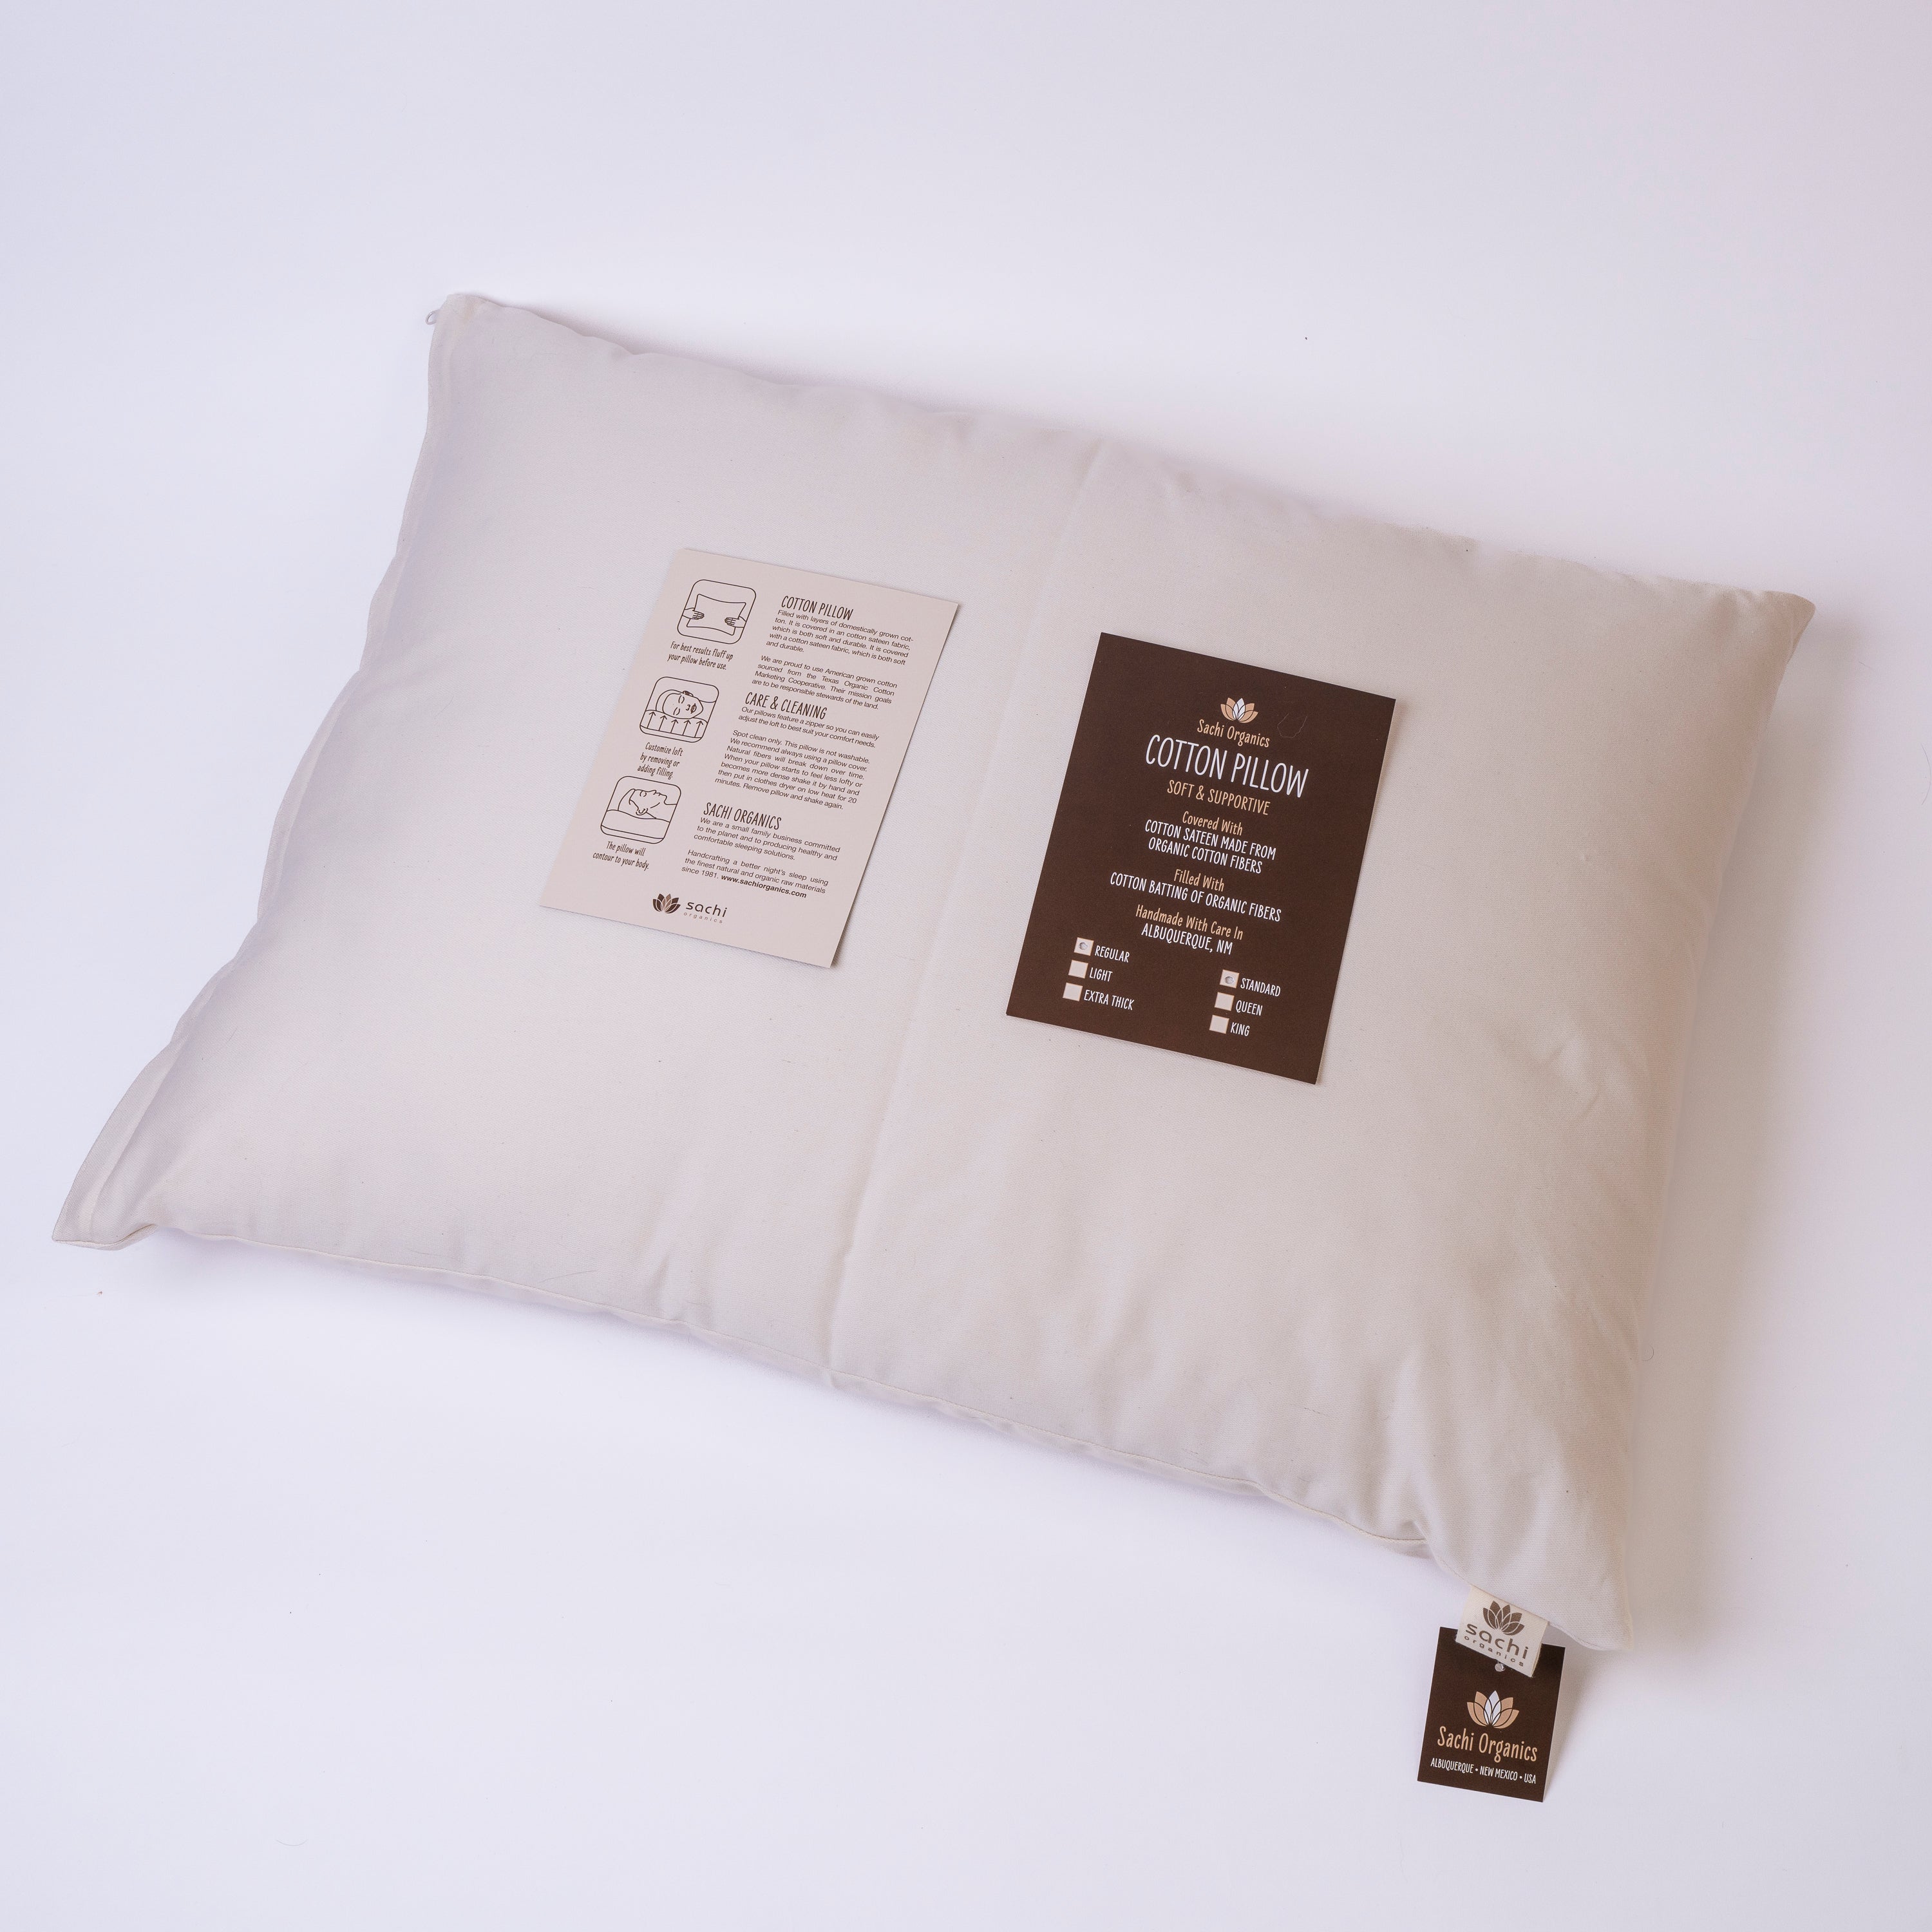 Ergonomic Pillow Filled with GOTS Certified Cotton